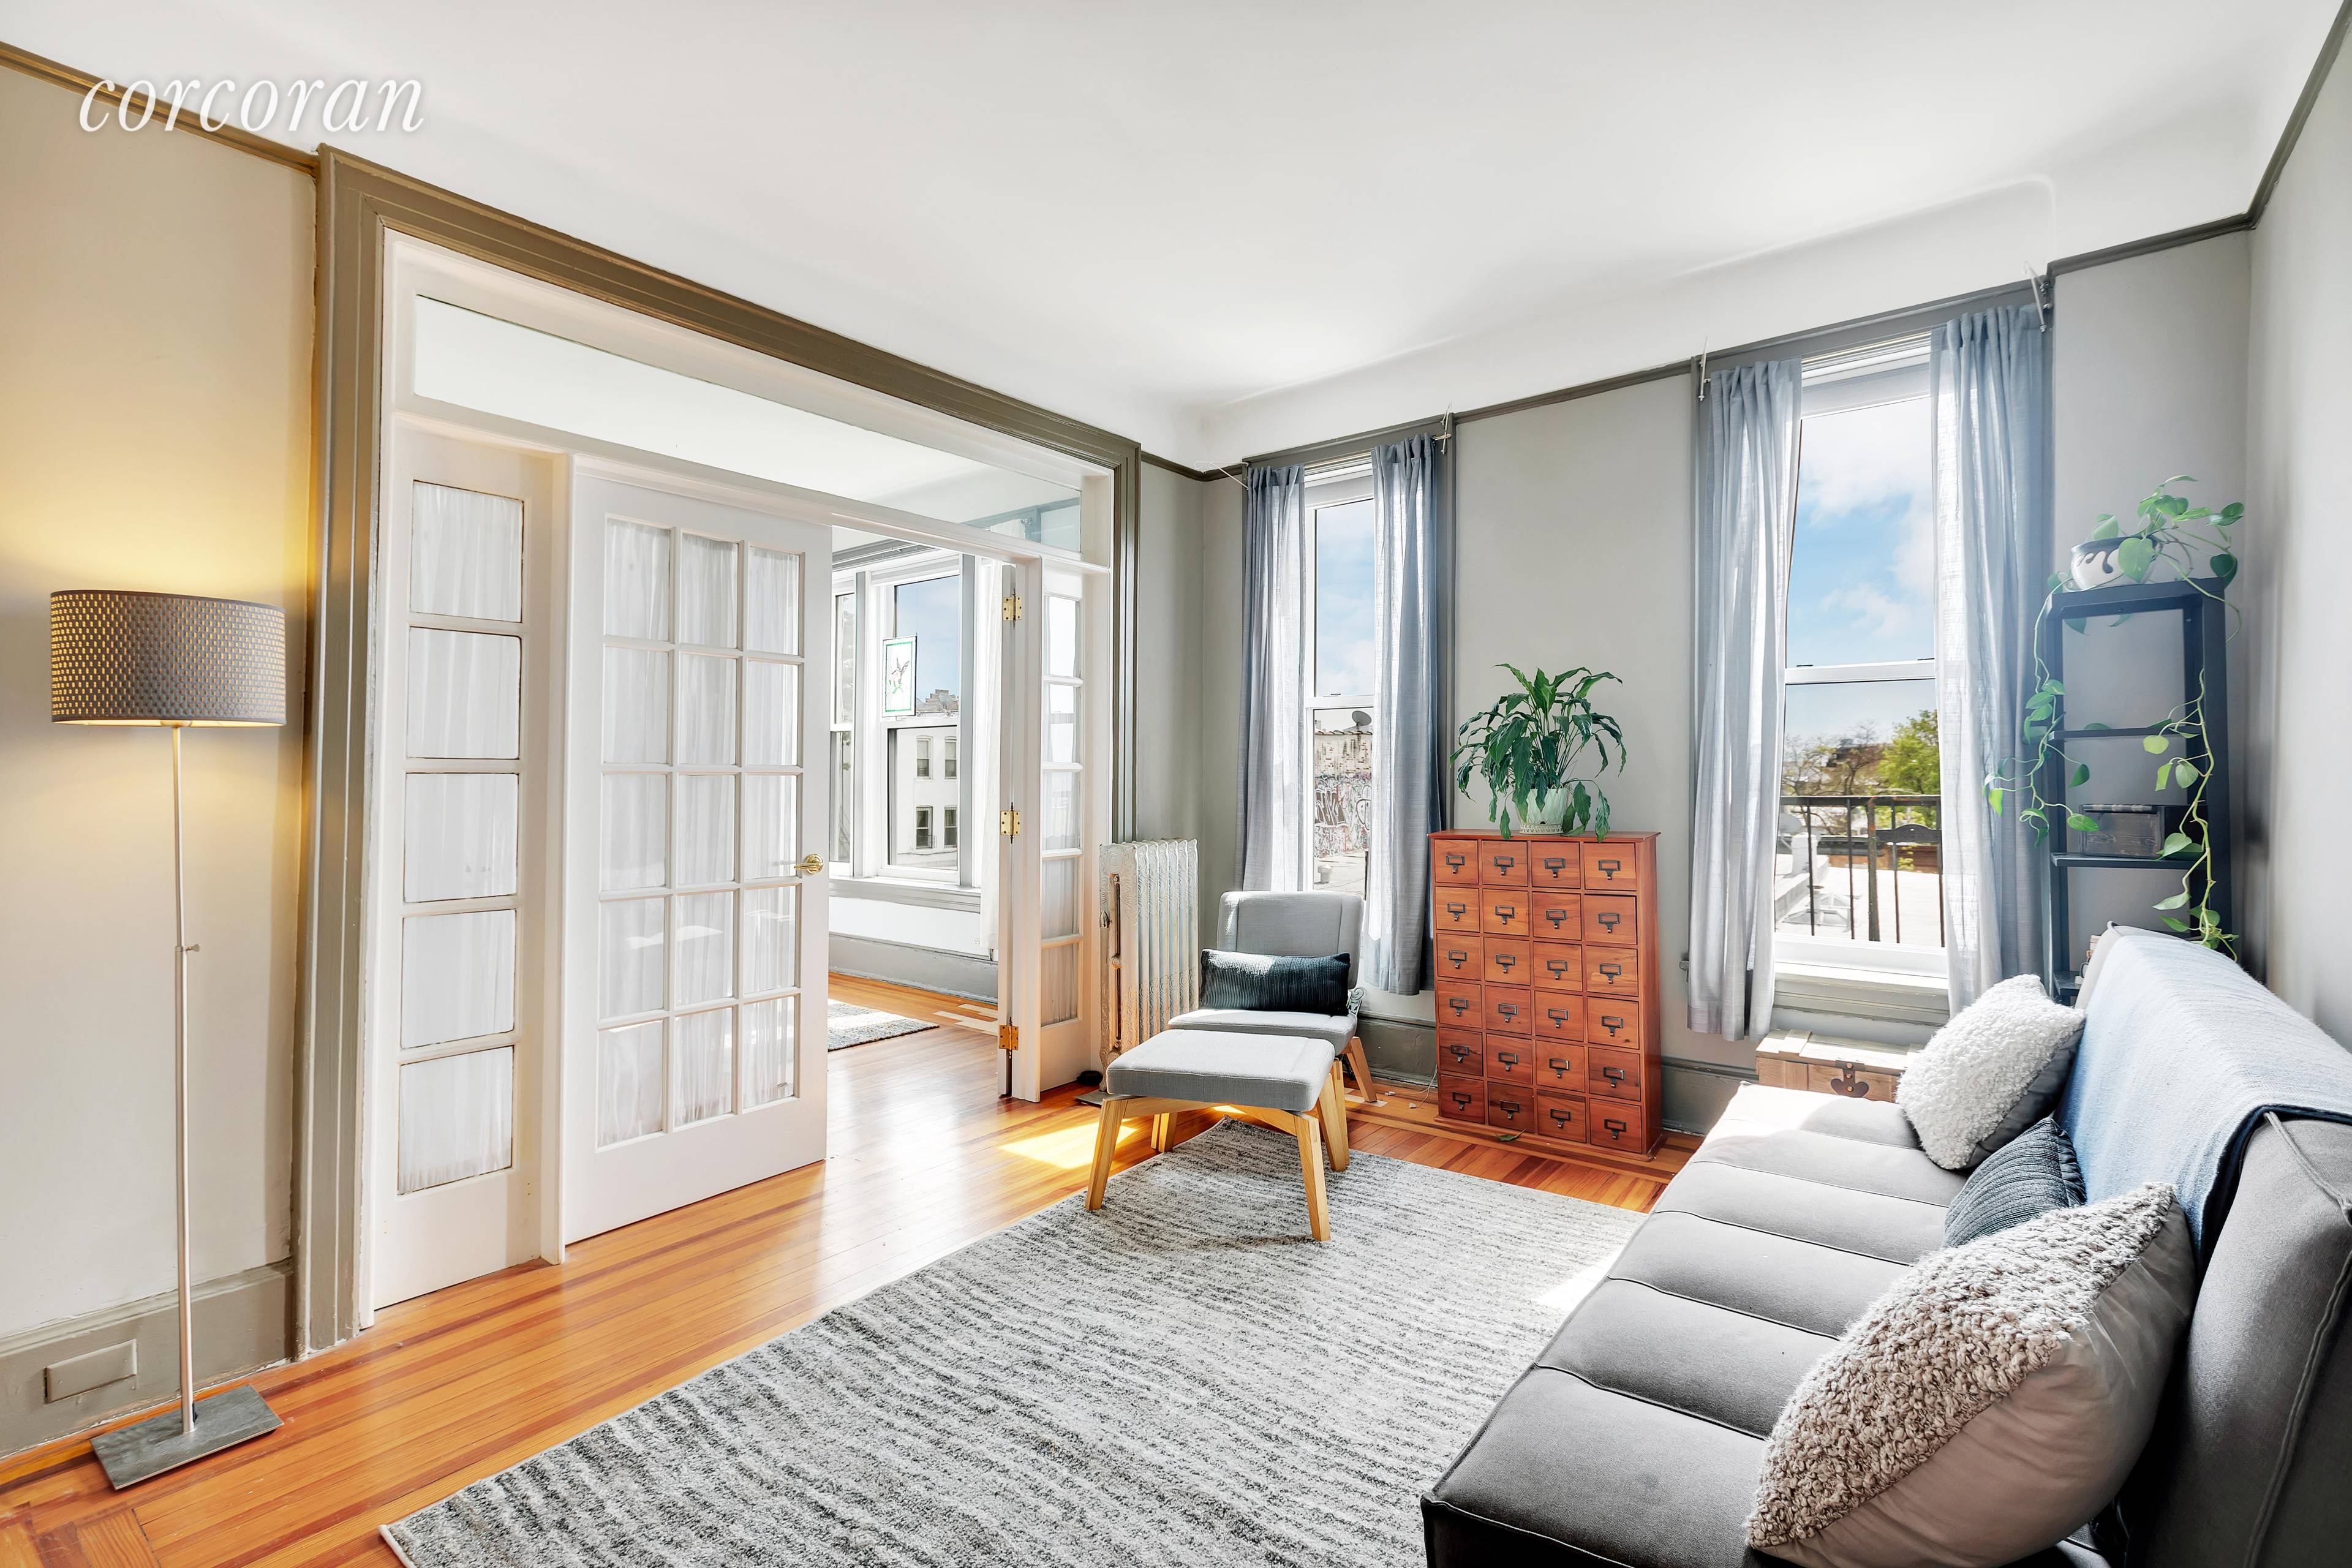 Welcome home to this sun drenched charming 2 bedroom coop apartment on one of the prettiest blocks in Sunset Park Brooklyn.